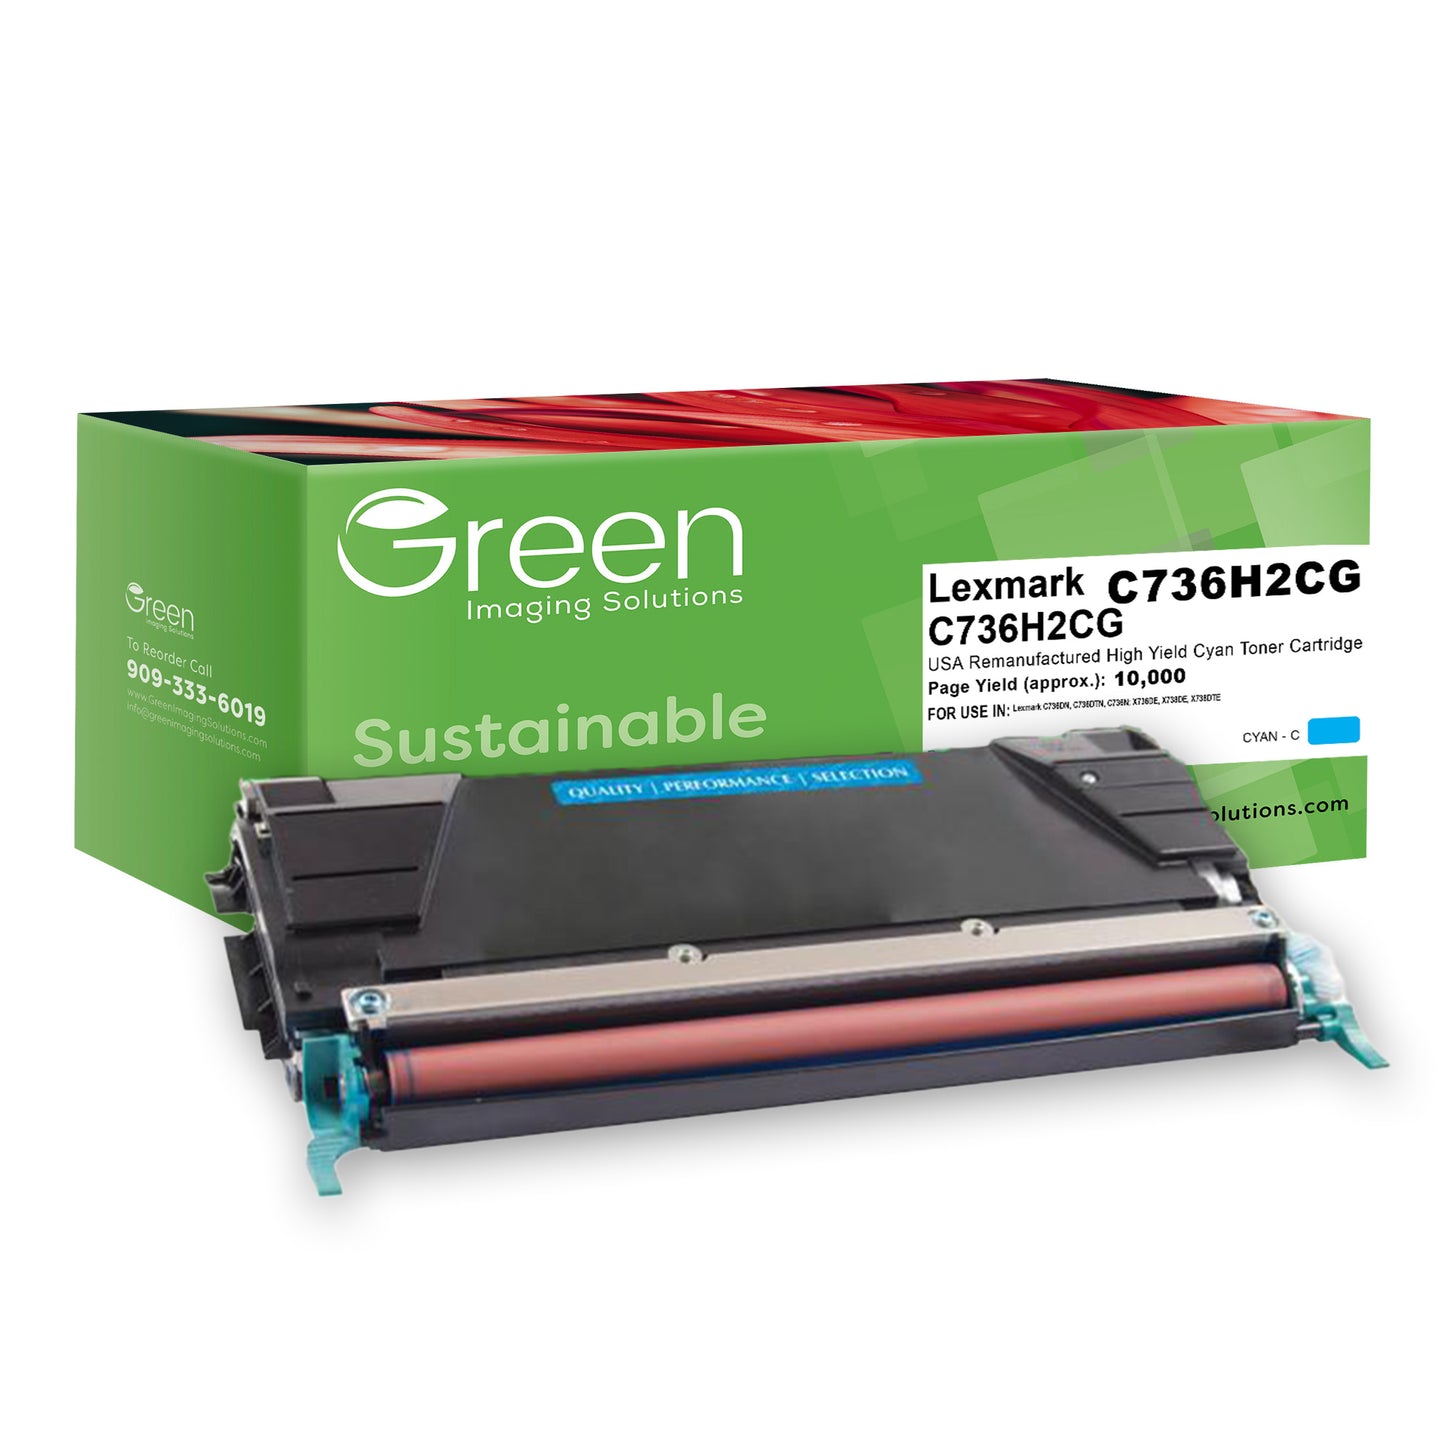 Green Imaging Solutions USA Remanufactured High Yield Cyan Toner Cartridge for Lexmark C736/X736/X738